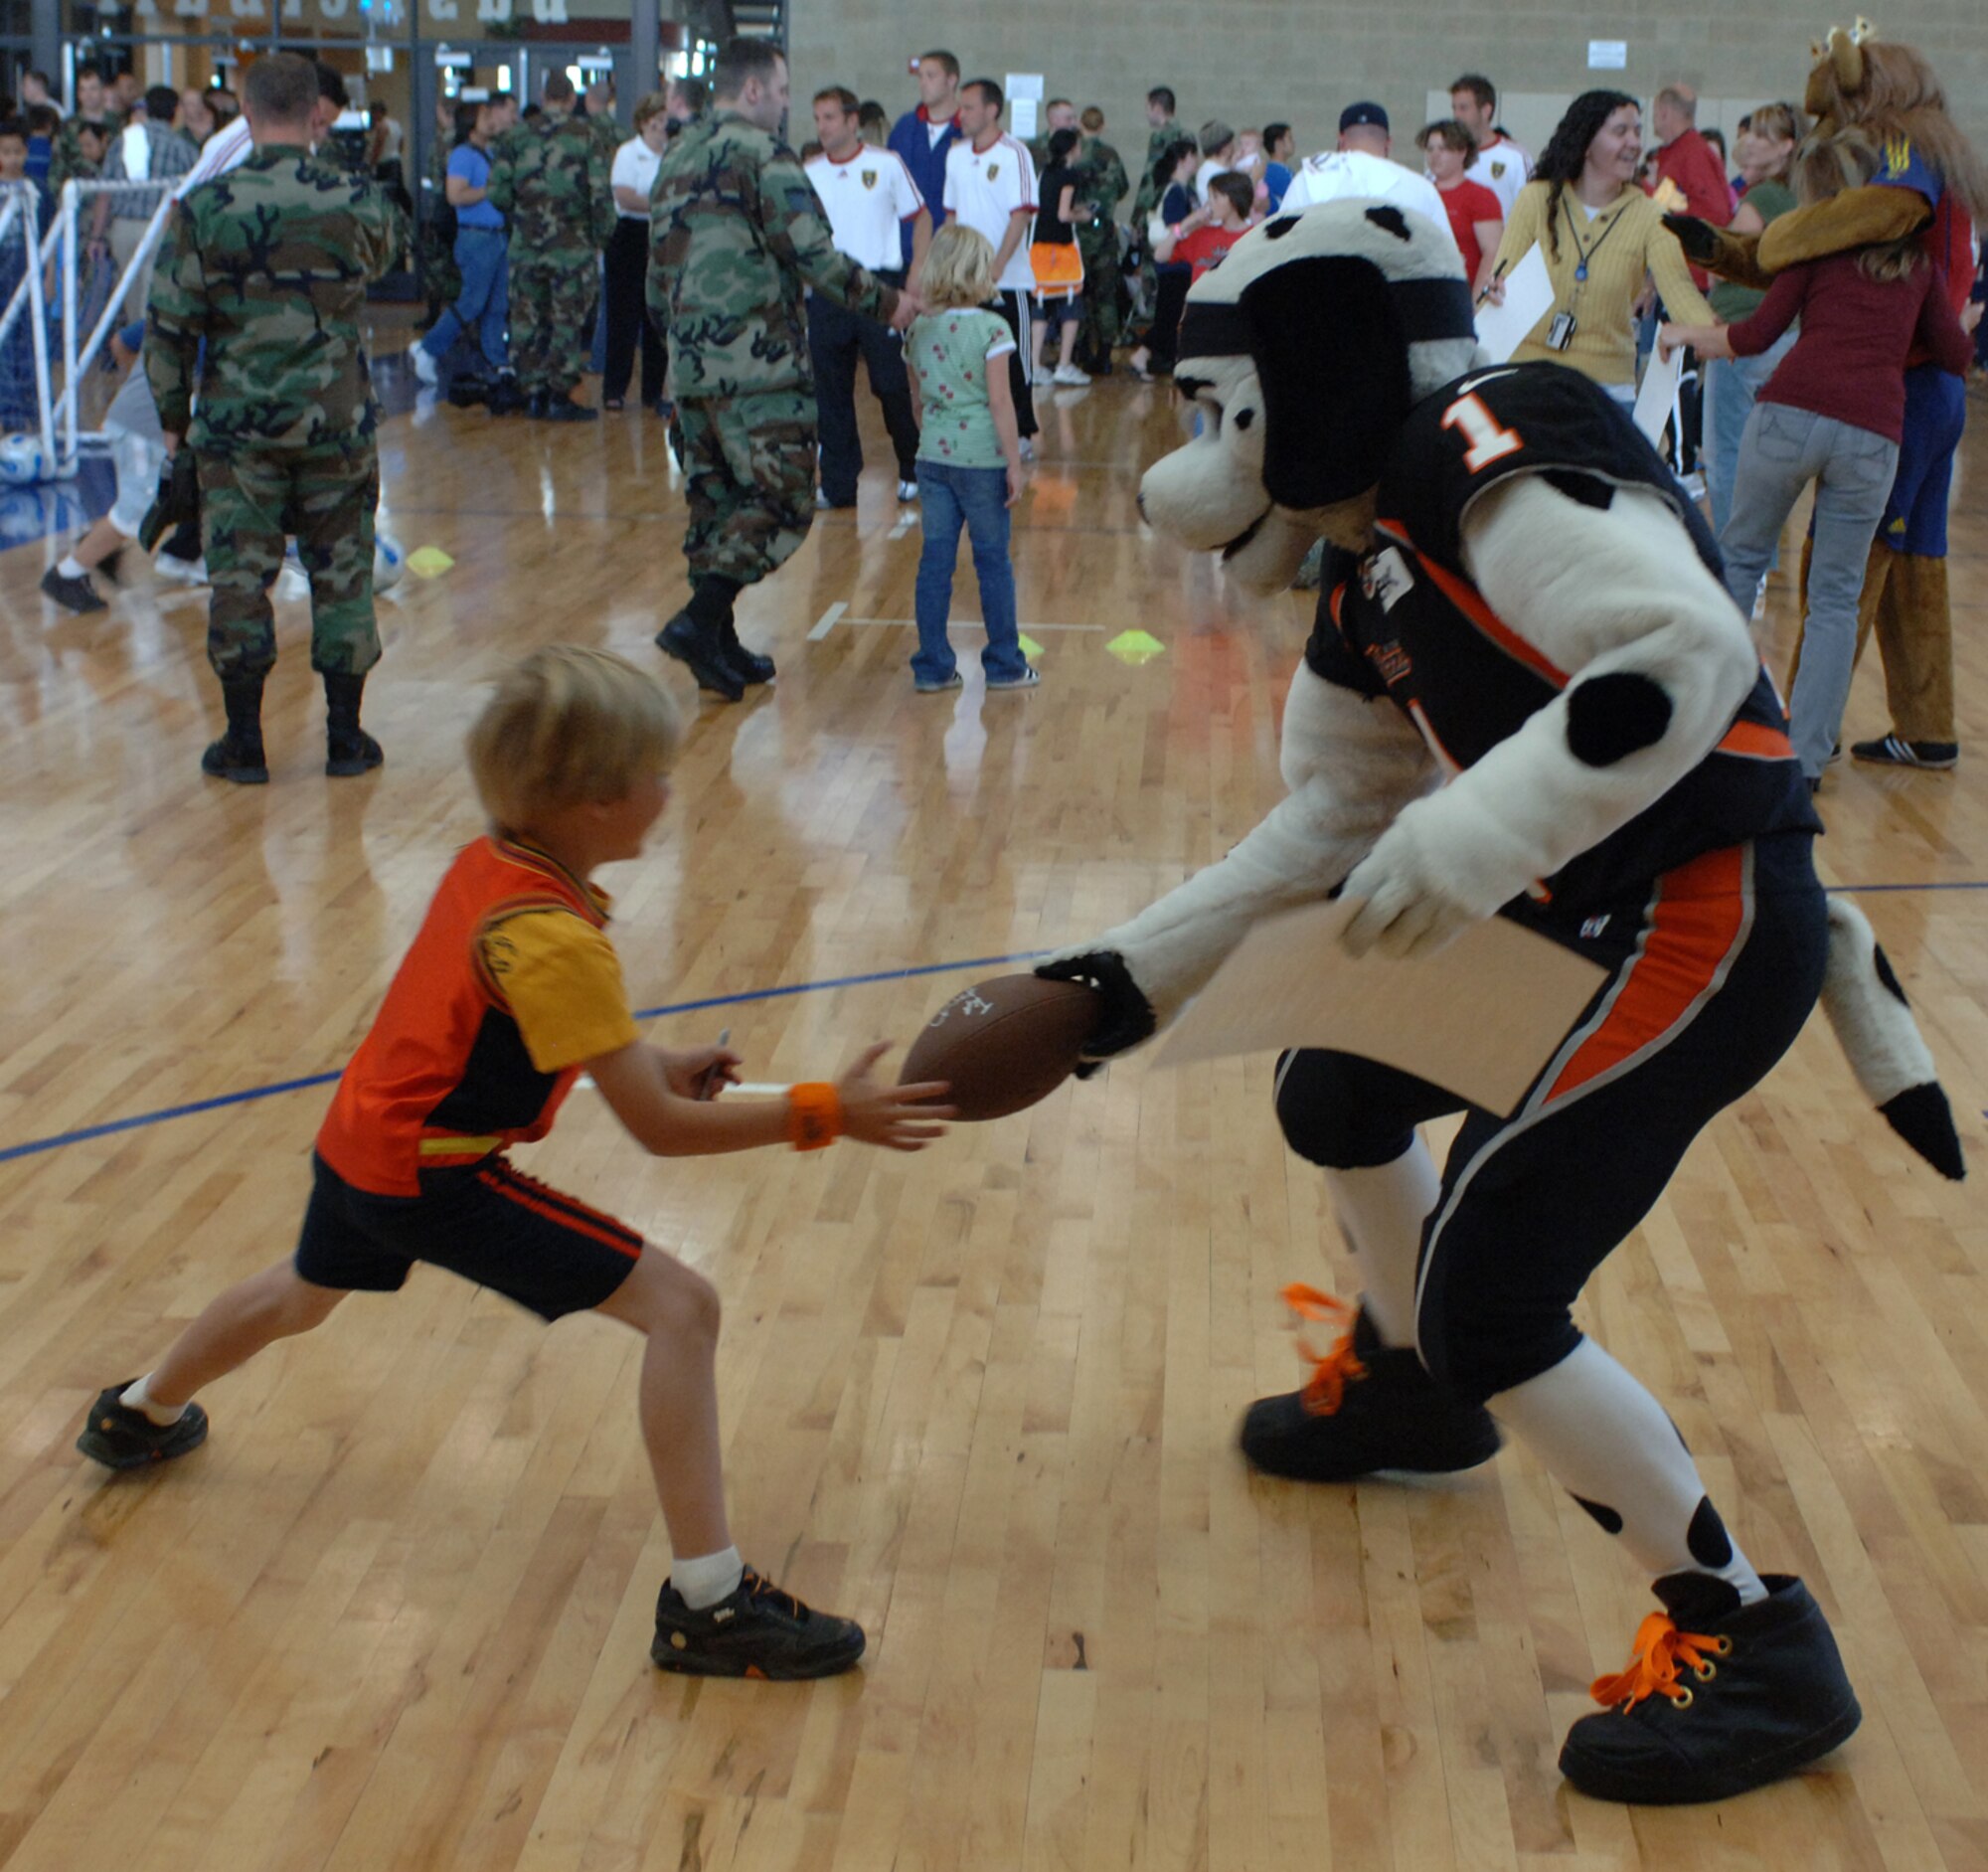 Utah Blaze mascot Chief Blaze plays keep away from a young fan trying to get an autographed football from him during the Salute to Team Hill held at the base fitness center. Photo by Alex R. Lloyd